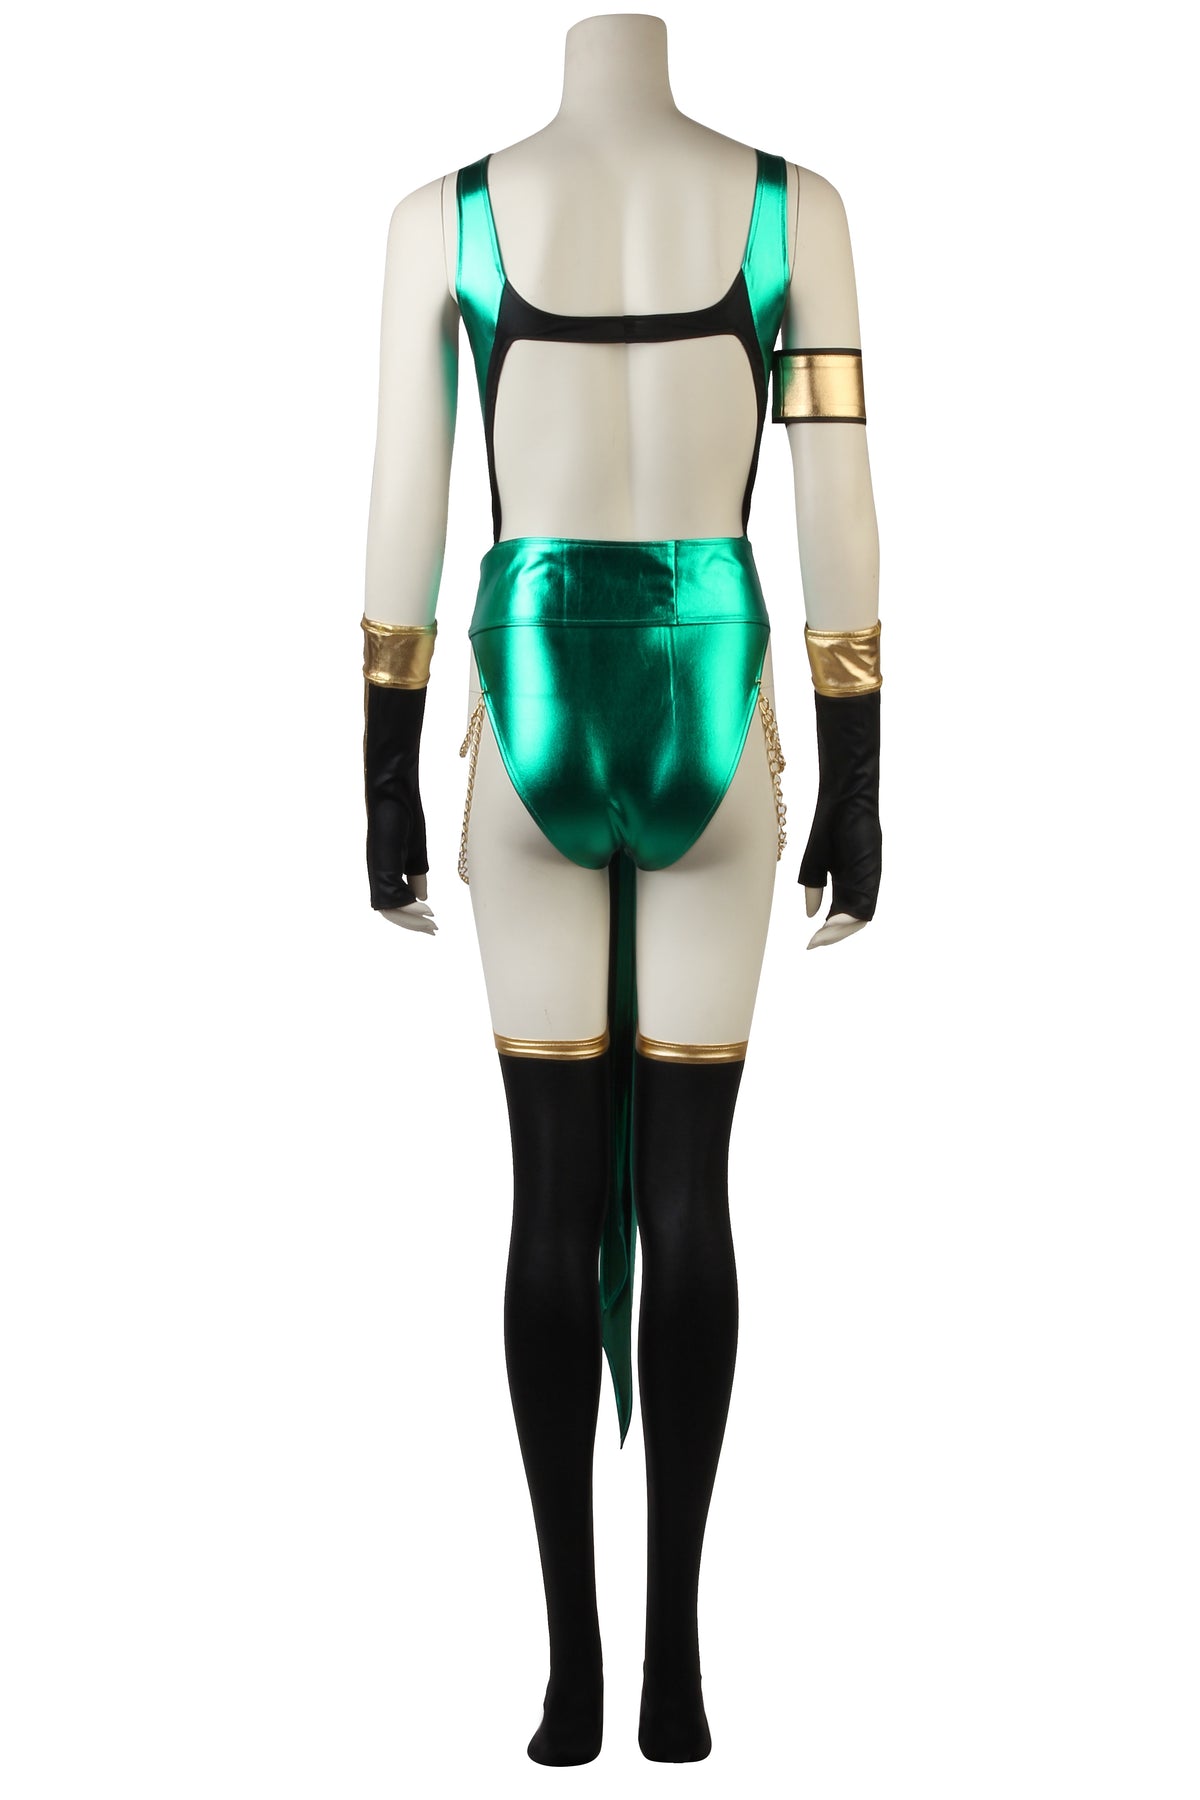 Game Mortal Kombat X Jade Costume Cosplay Blue Sexy Tights Battle Combat Women&#39;s Outfit Adult Full Suit Halloween